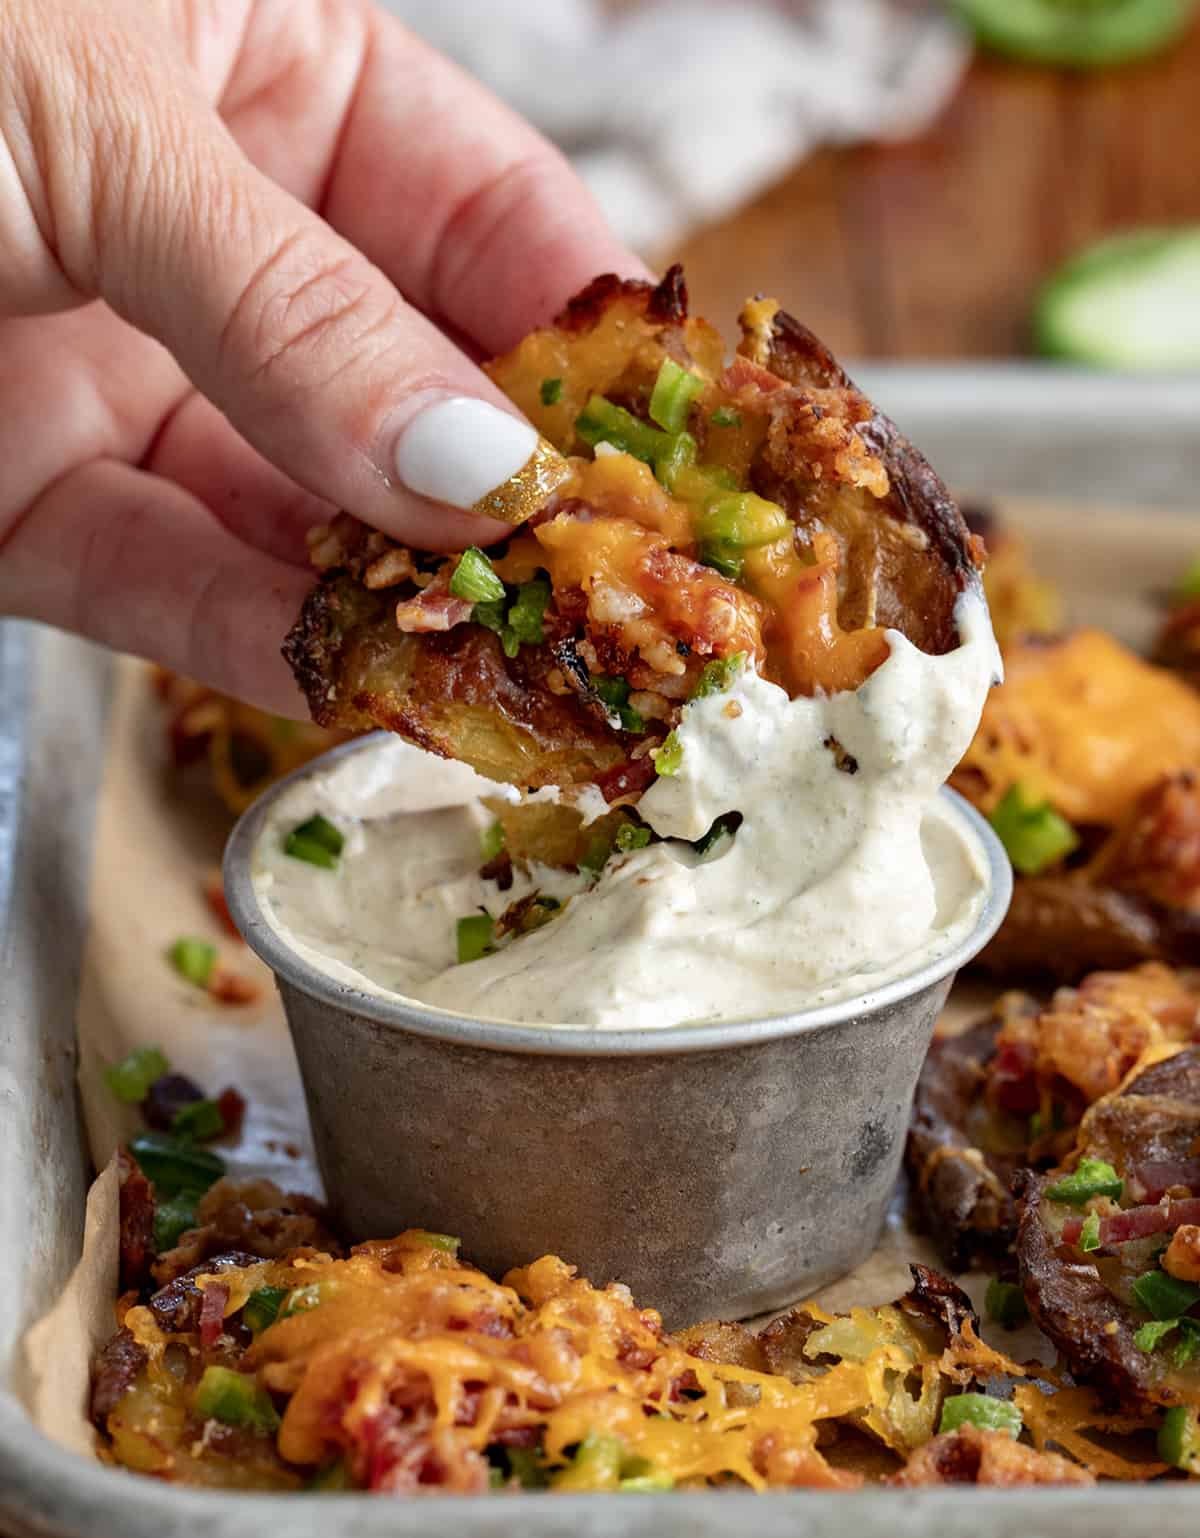 Hand Dipping a Jalapeno Popper Smashed Potato into Sauce.